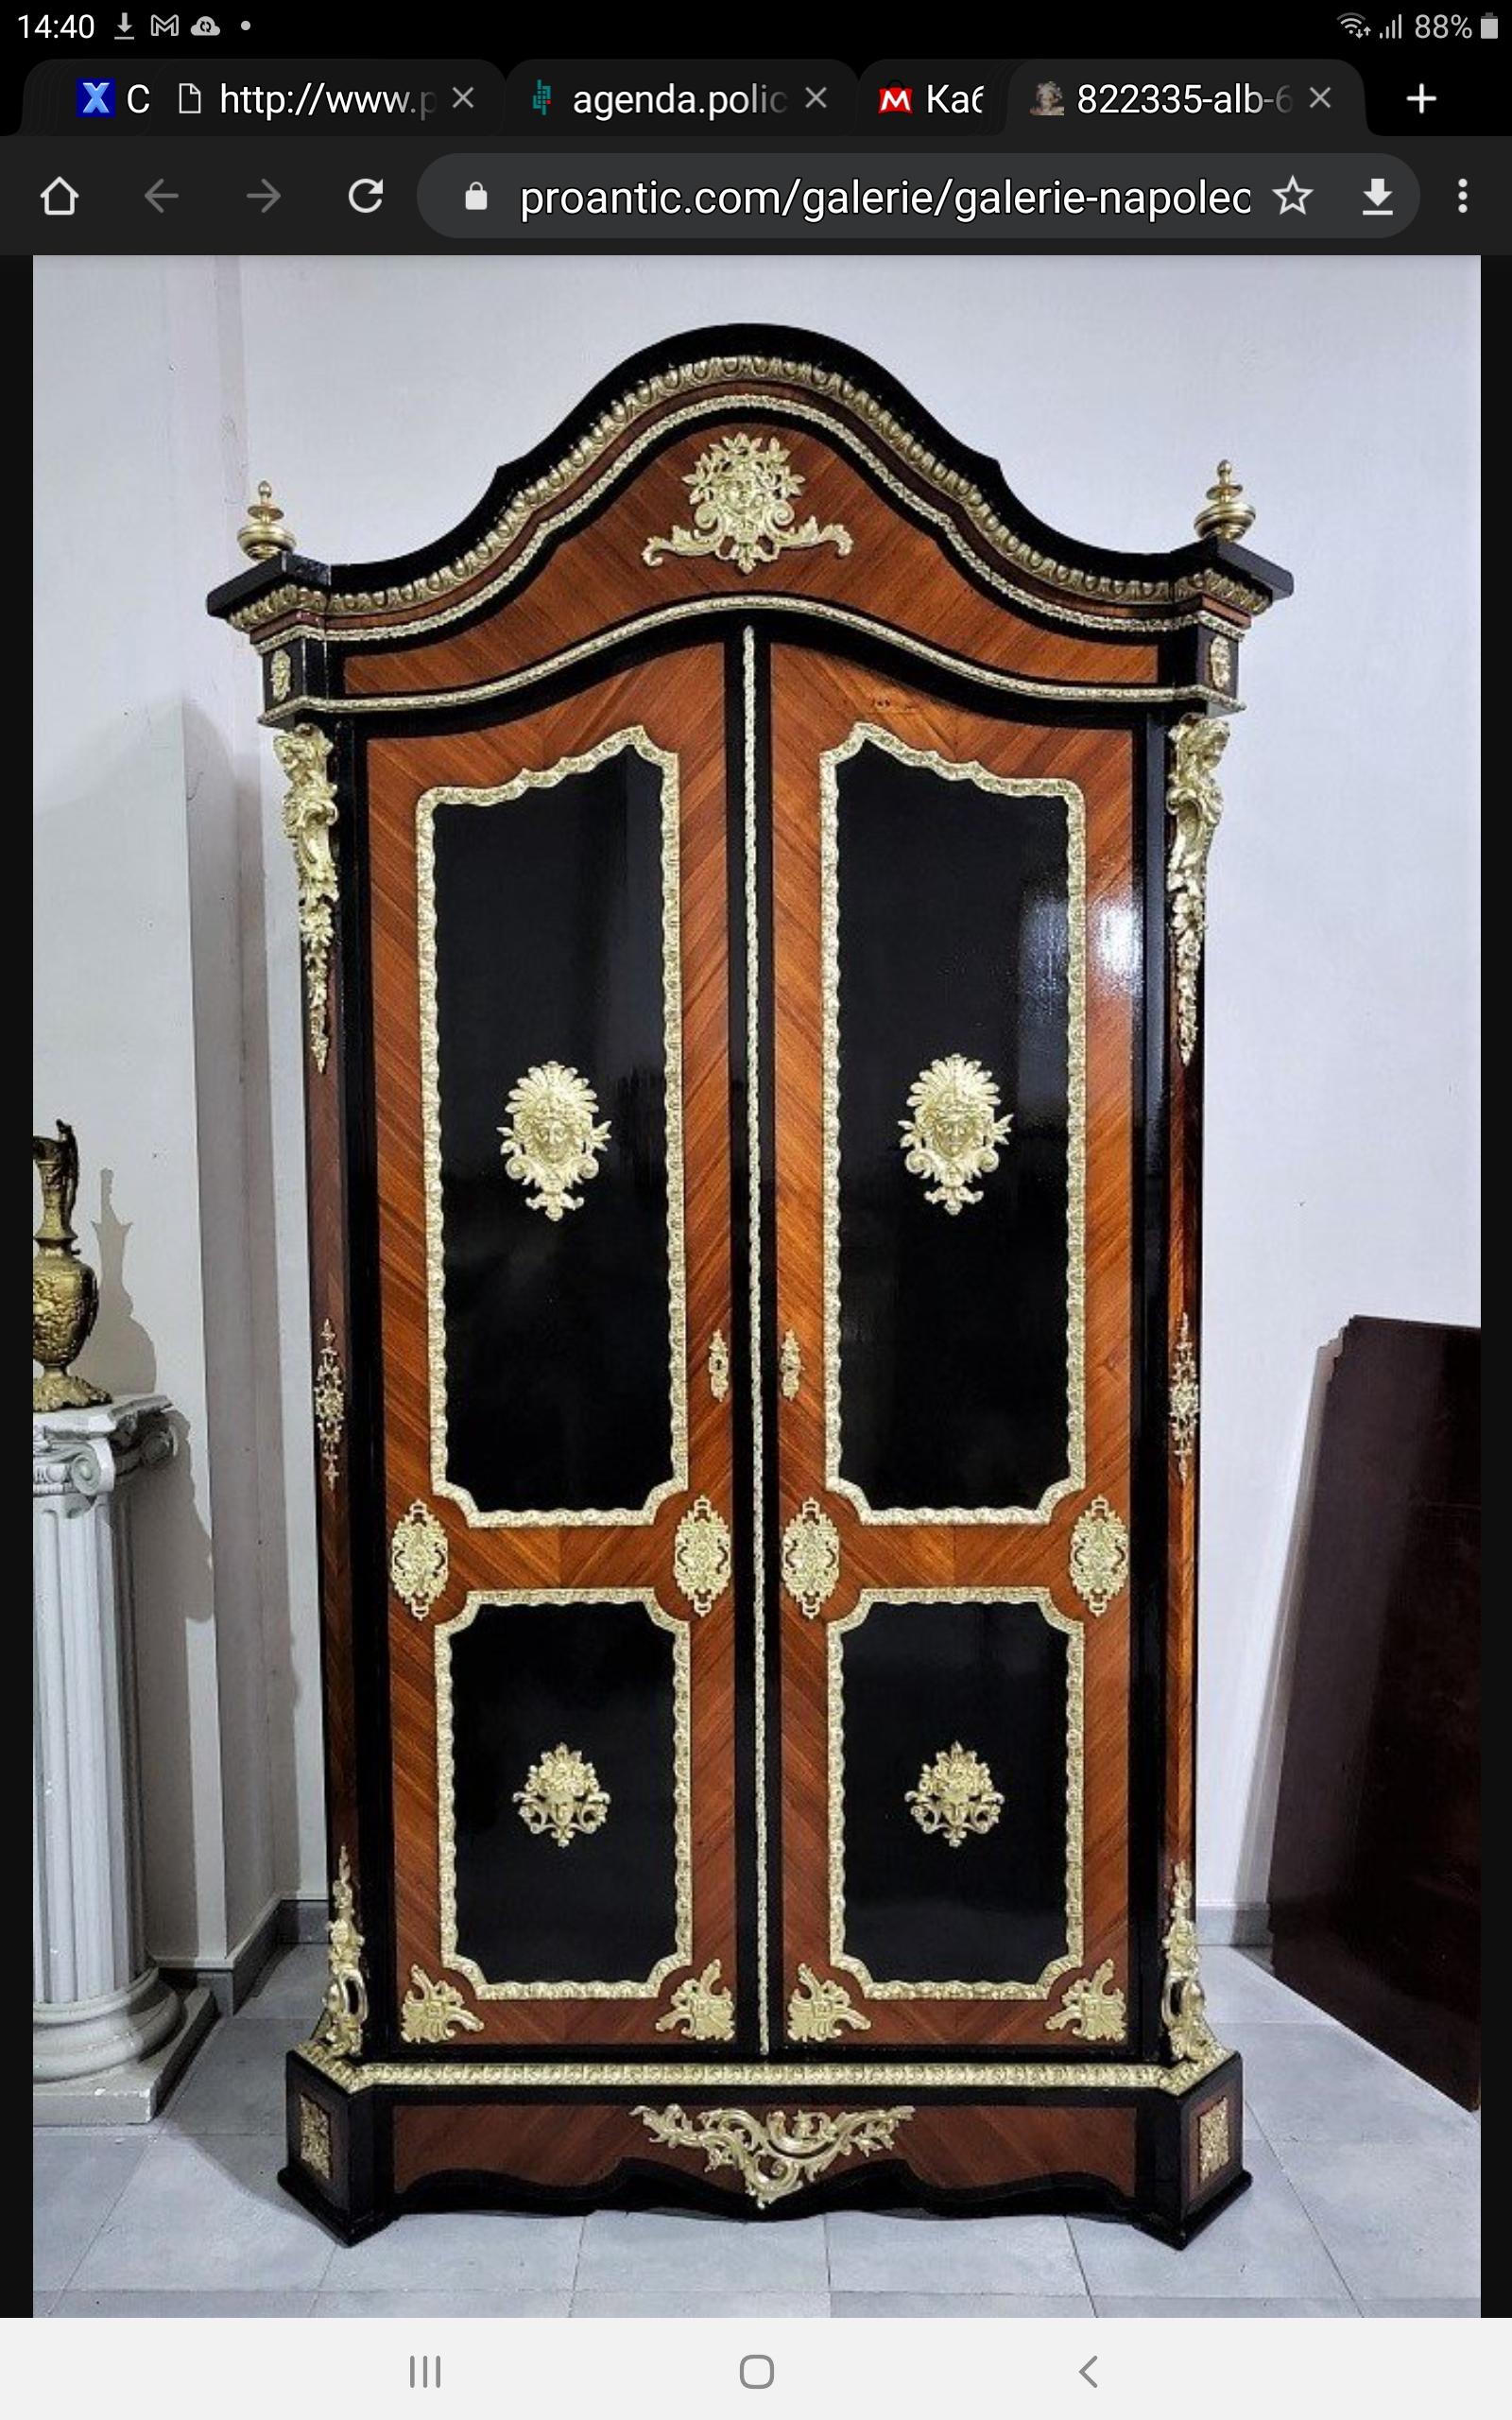 Blackened Diehl Signed Boulle Marquetry Napoleon III Style Armoire Wardrobe, France, 1870